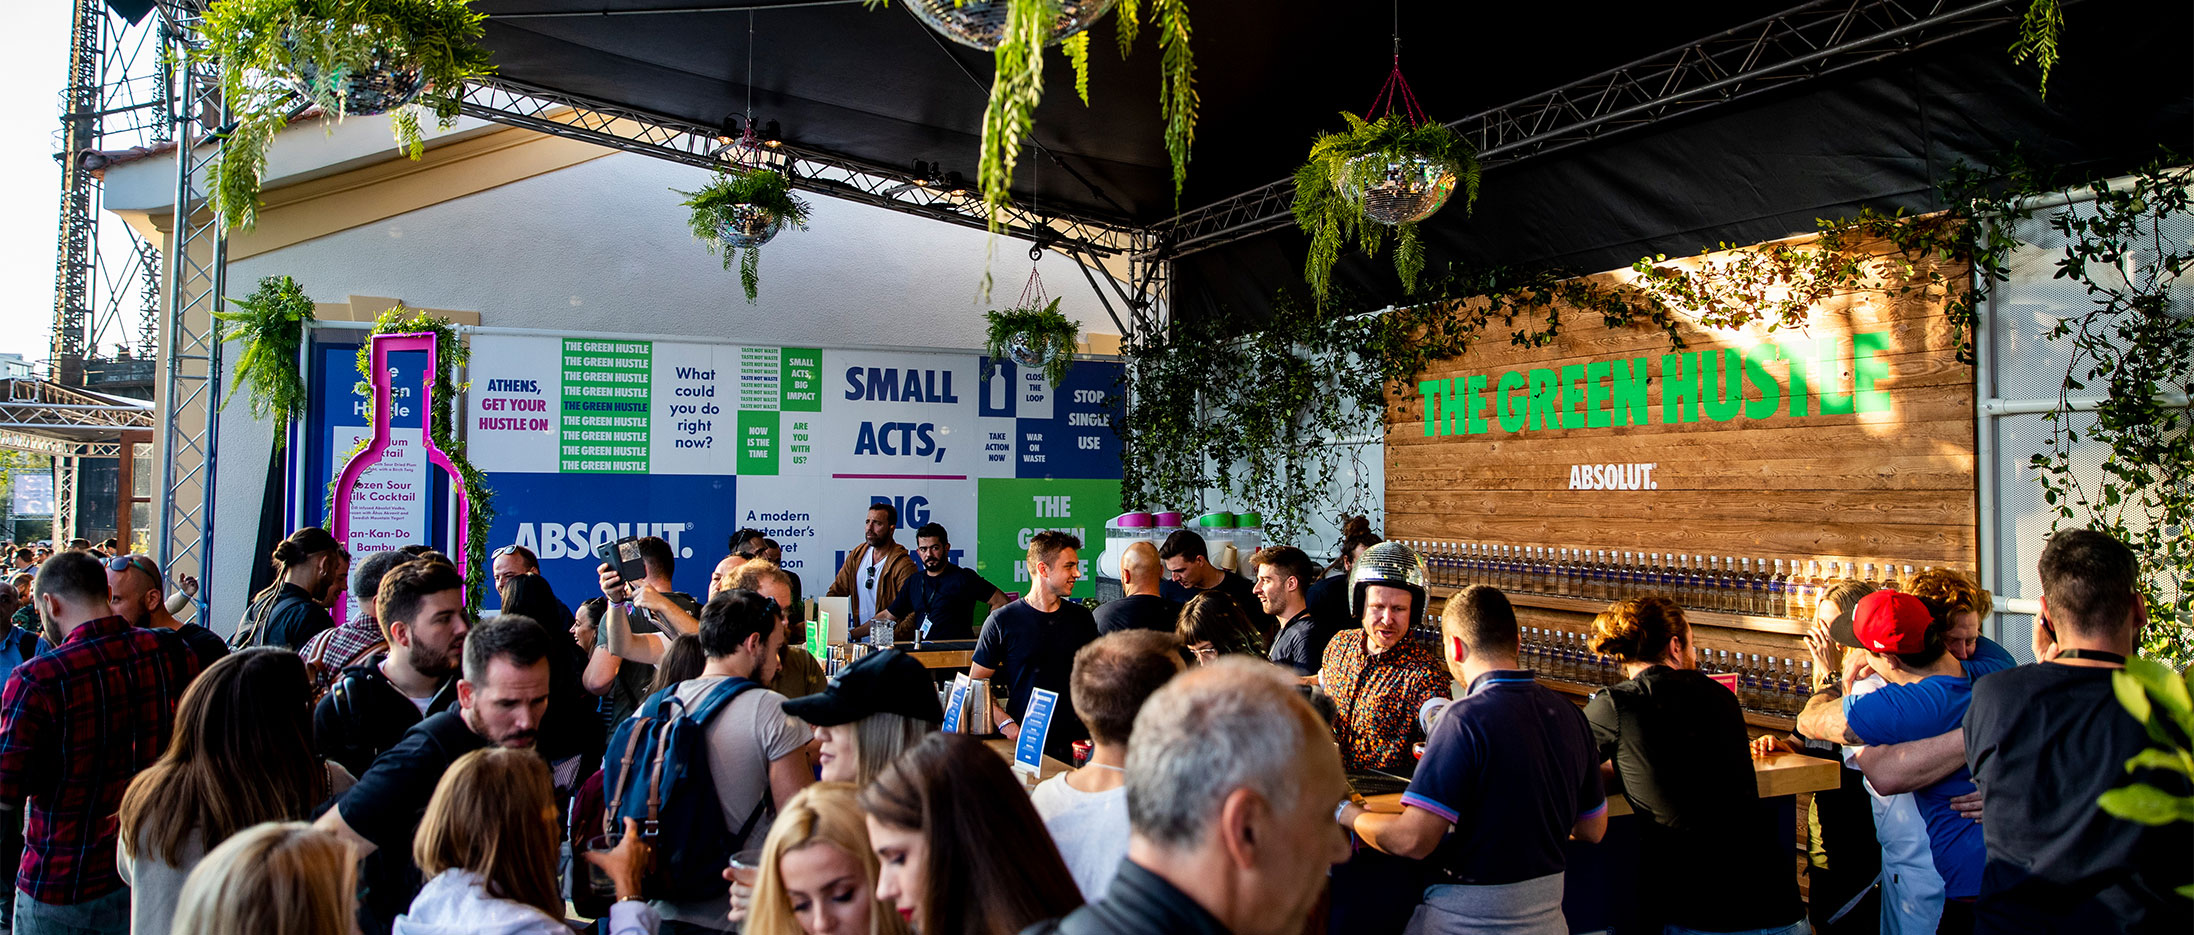 The Green Hustle bar with a crowd of people